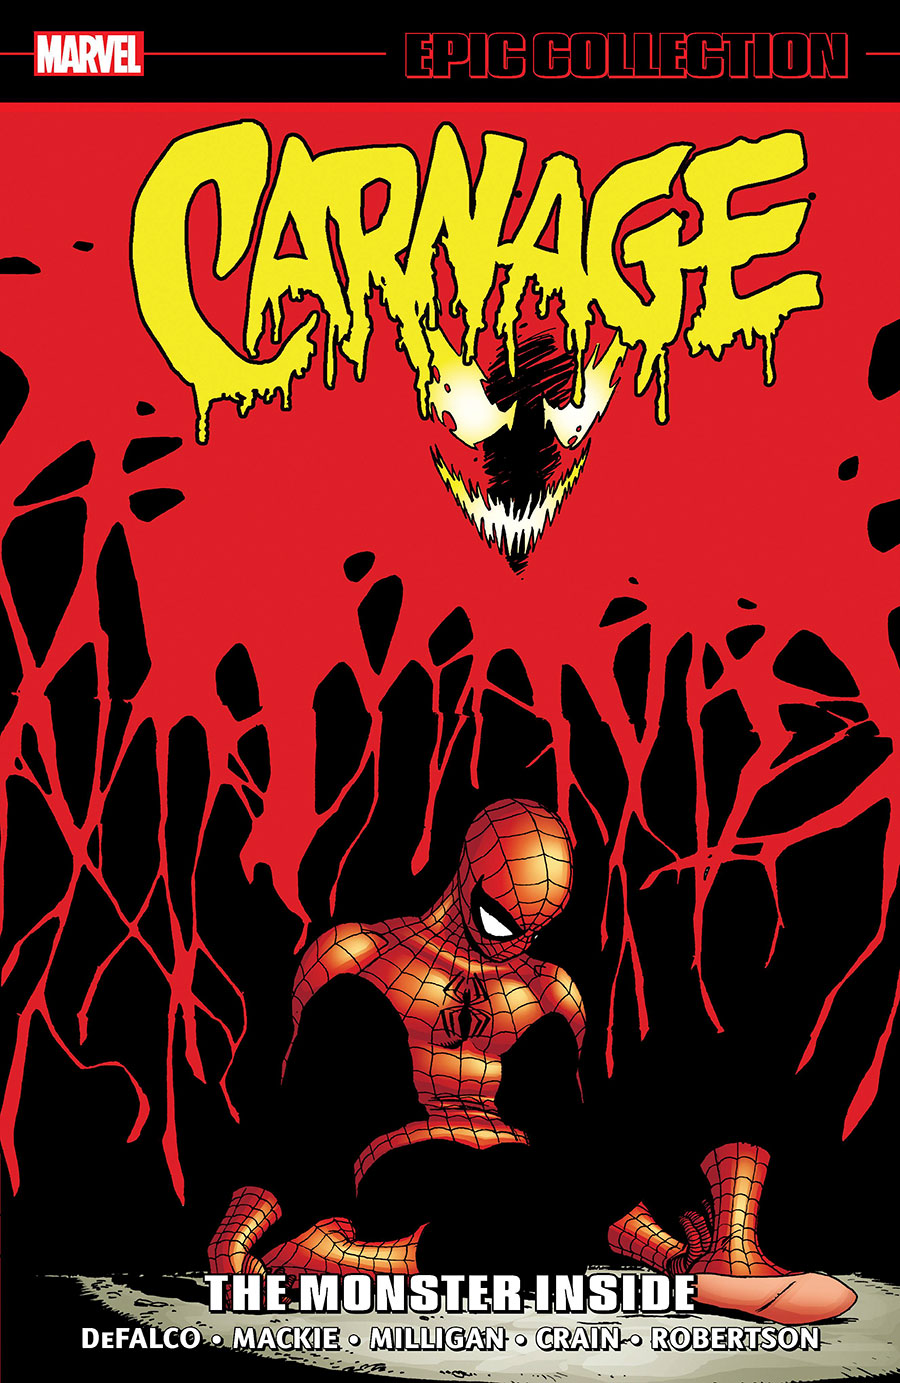 Carnage Epic Collection Vol 3 The Monster Inside TP